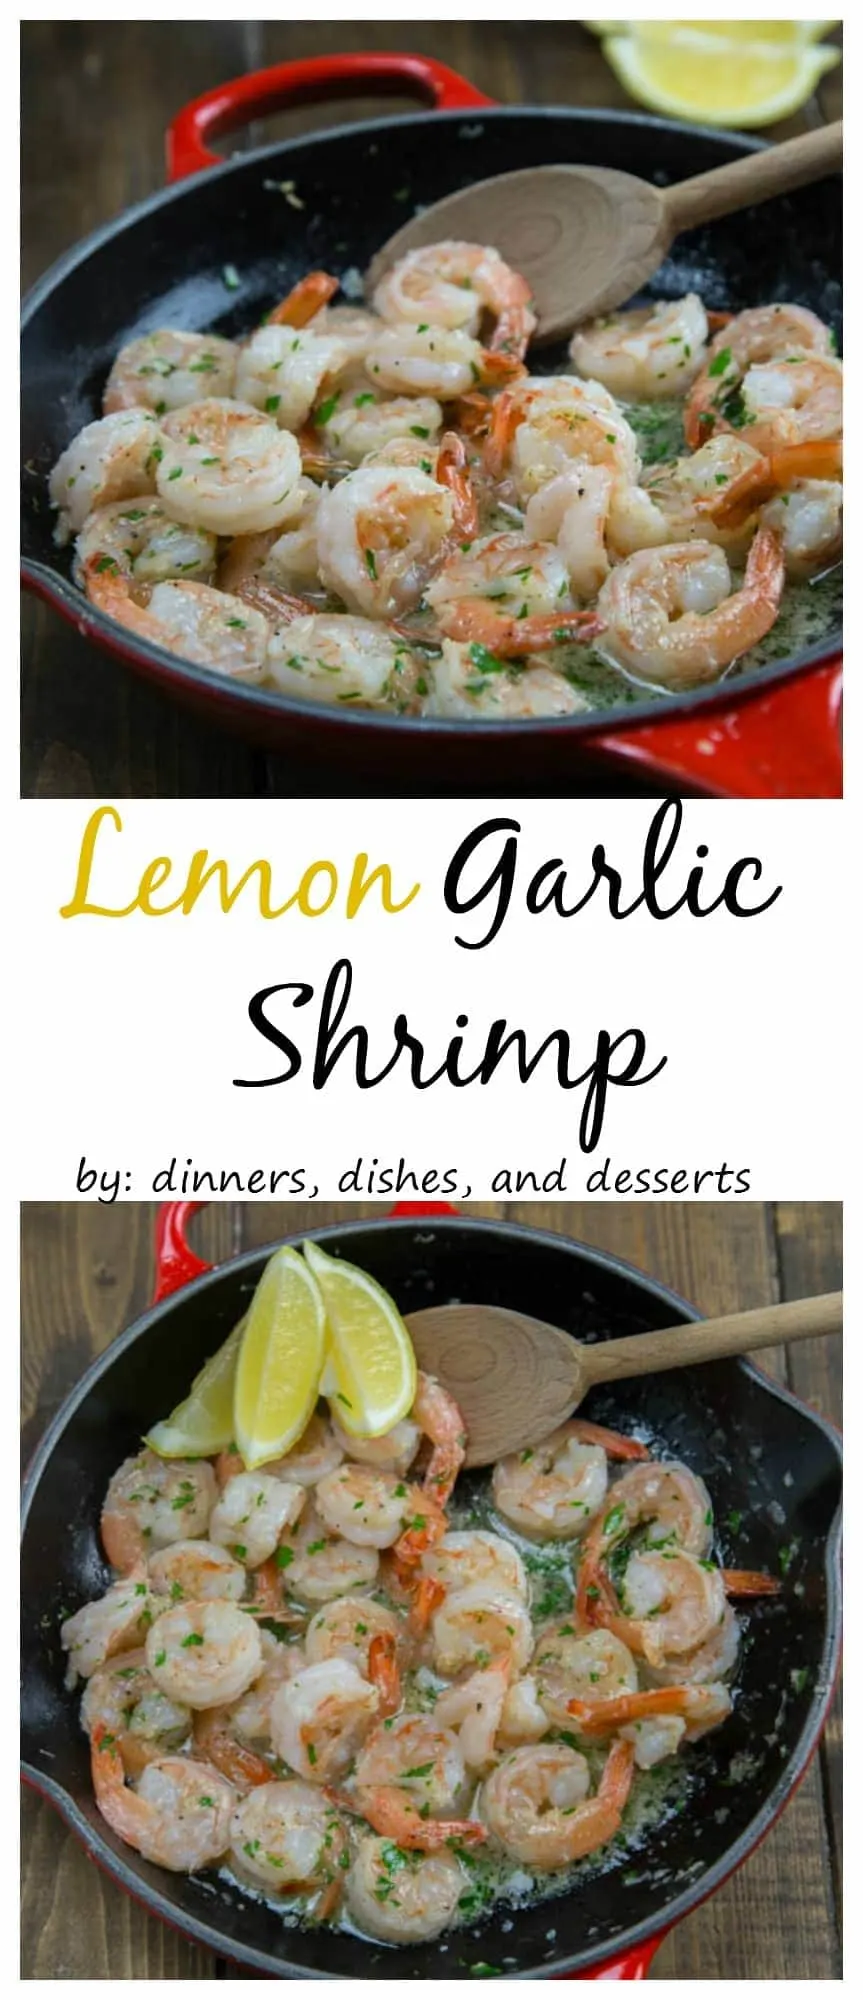 Lemon Garlic Shrimp - Super quick and easy dinner of shrimp sauteed in butter and garlic and then finished with lemon juice. 